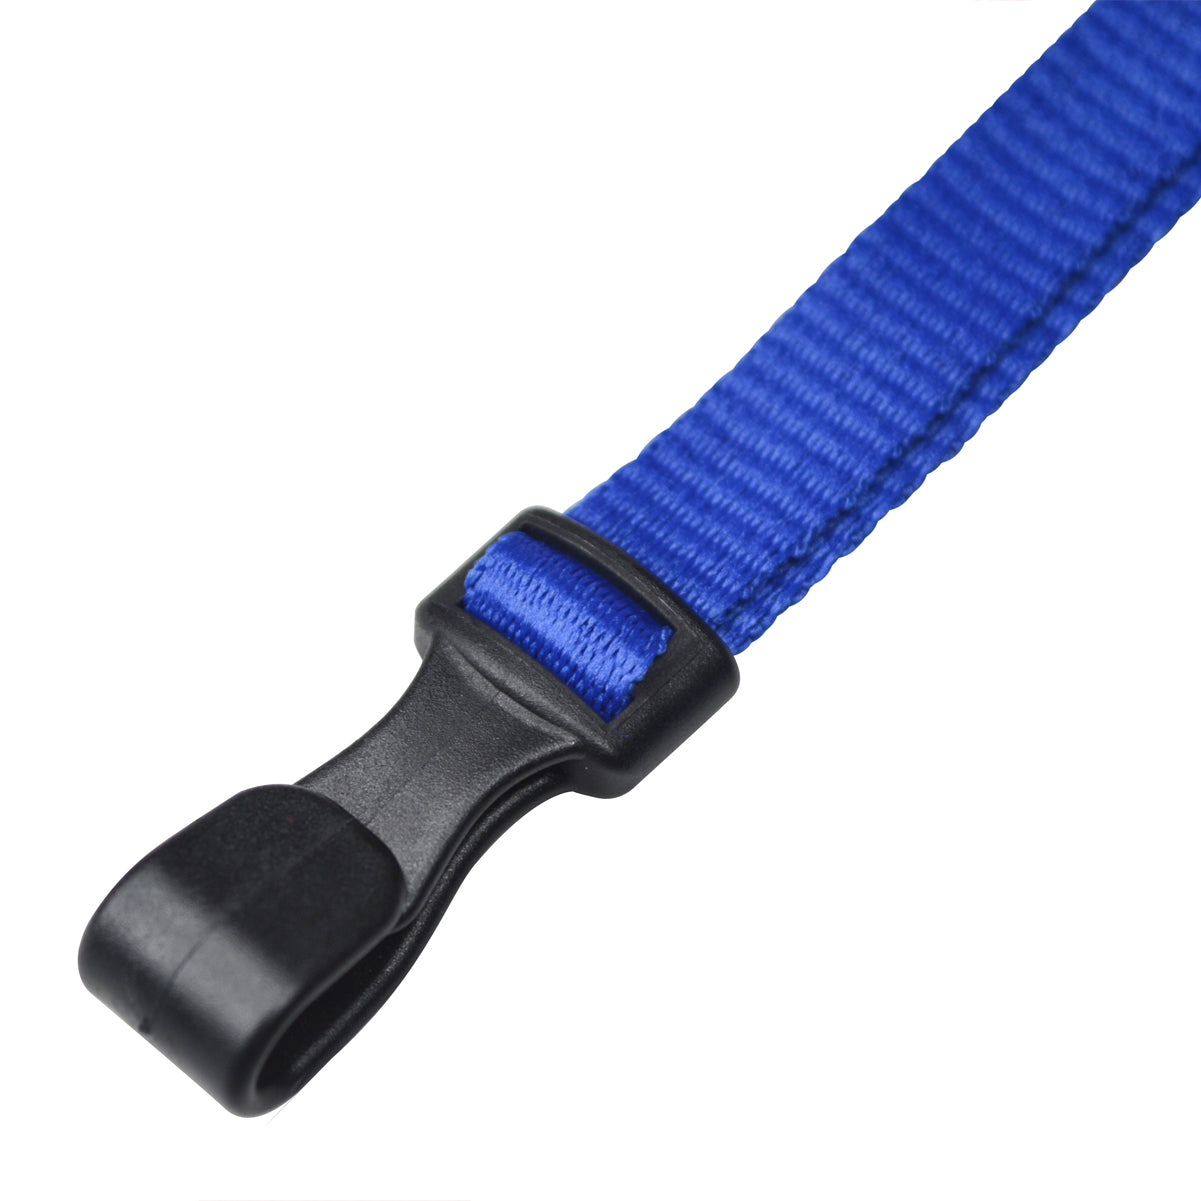 Close-up of a blue woven strap with a black plastic clip at the end, featuring a no twist design ideal for snag-sensitive environments: Triple Breakaway Lanyard with THREE Safety Breakaway Points (2137-300X).